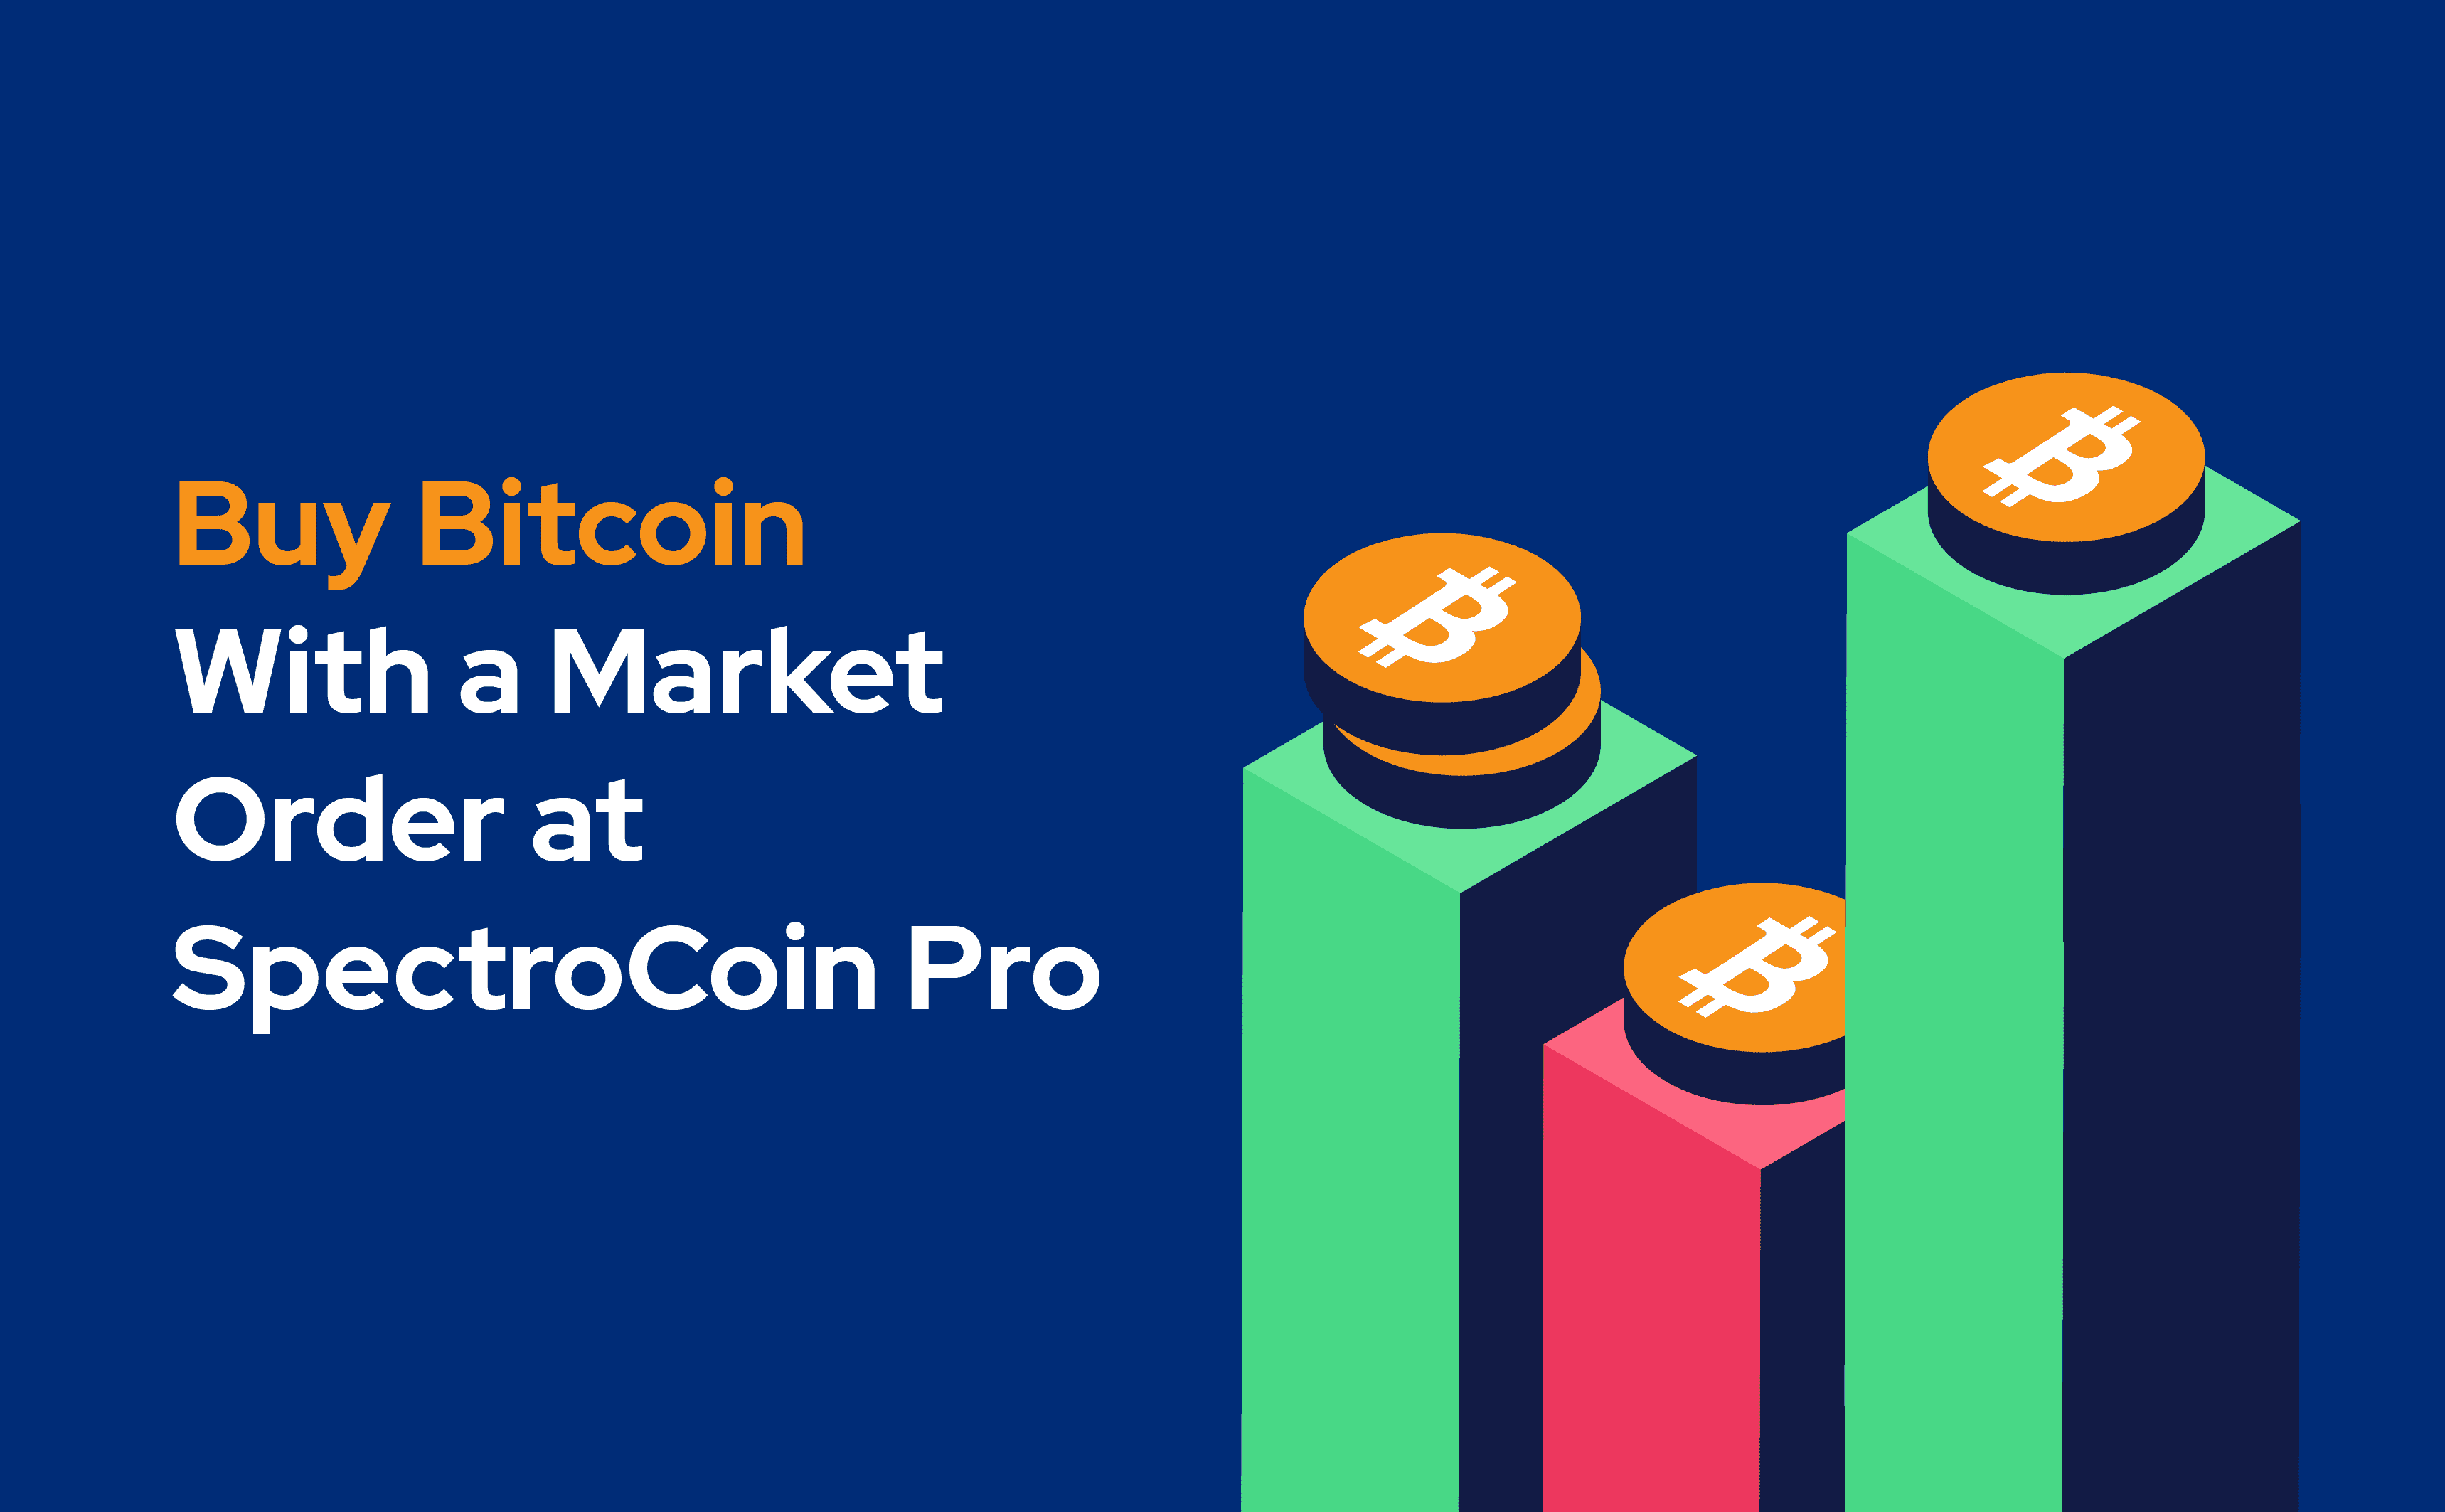 At SpectroCoin Pro, you can buy Bitcoin with a market order.